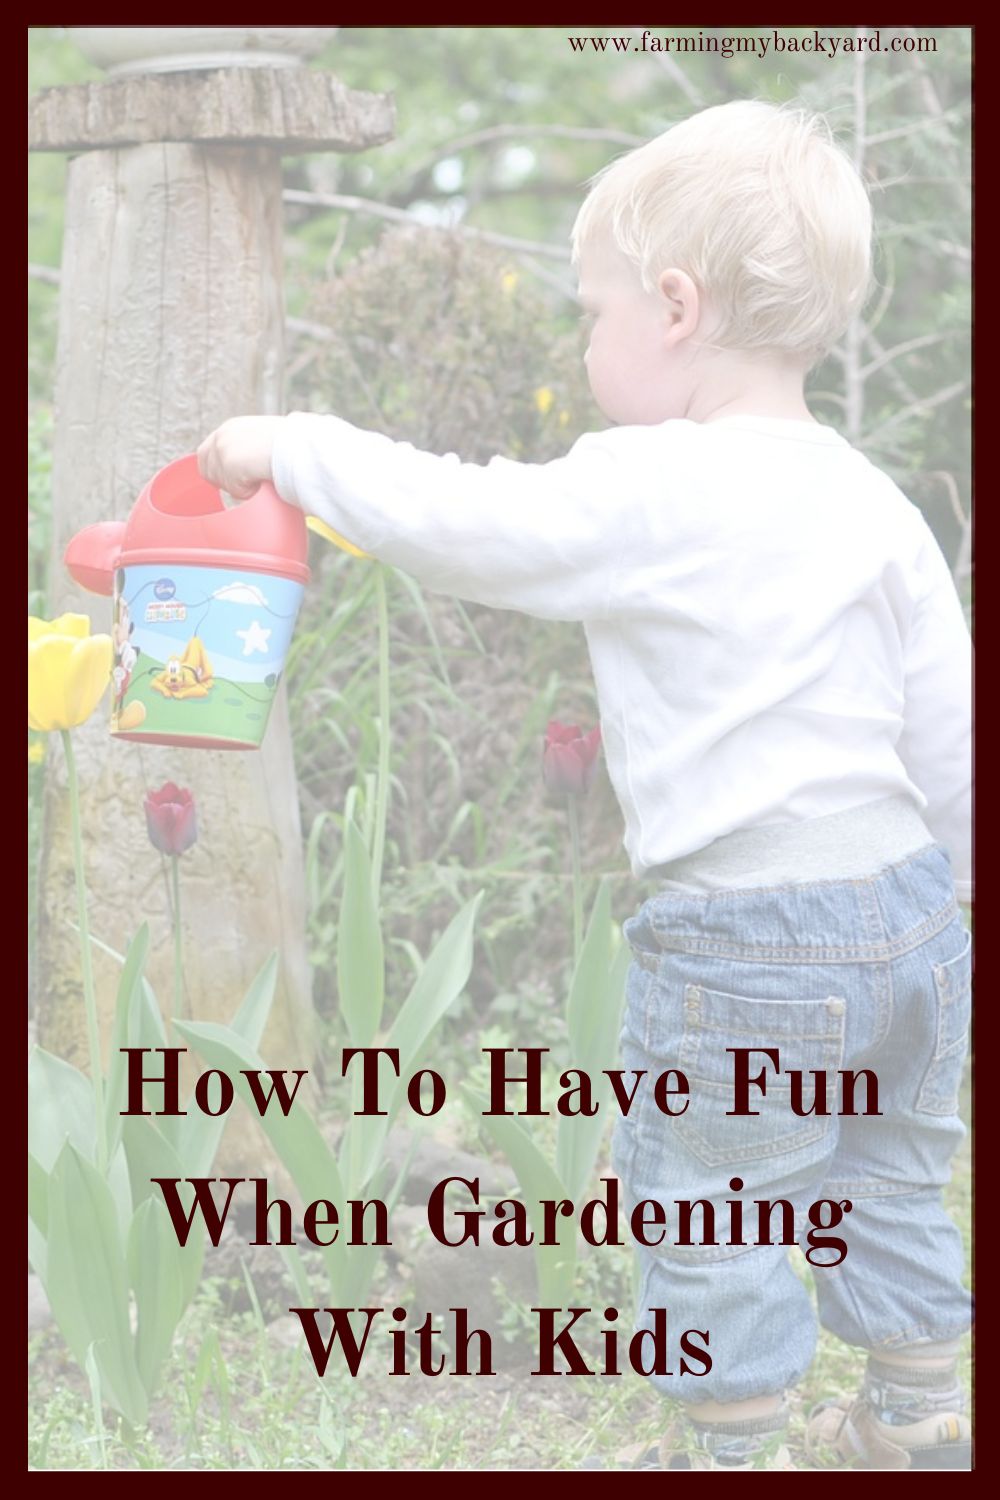 Gardening with kids doesn't have to be a lot of work or a big challenge. Here's how to encourage them to love gardening.